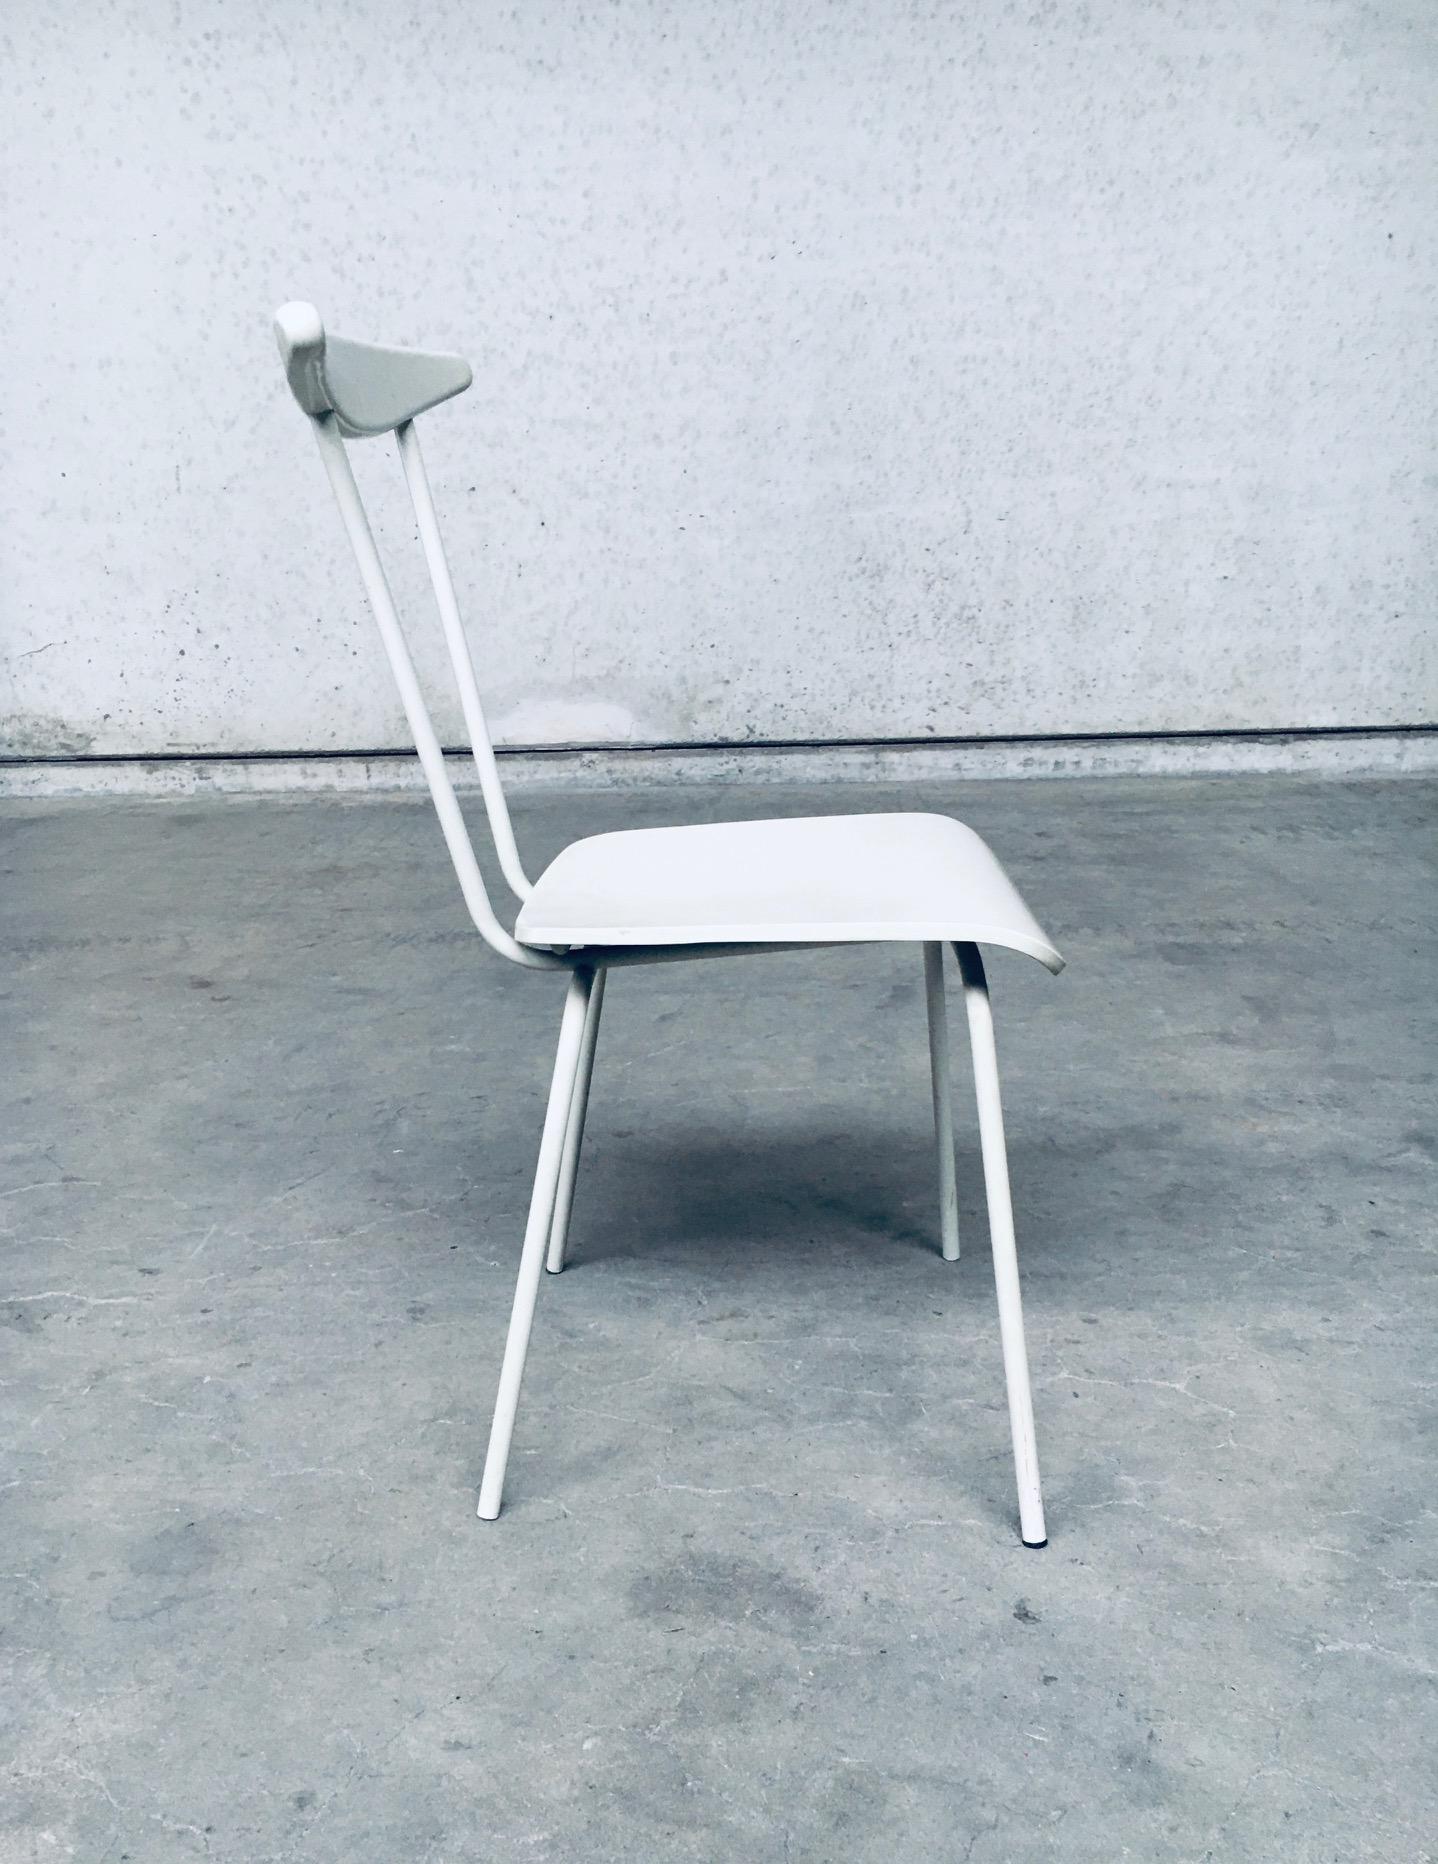 Mid-20th Century Mid-Century Modern Design Dress Boy Chair by Wim Rietveld for Auping, 1950's For Sale